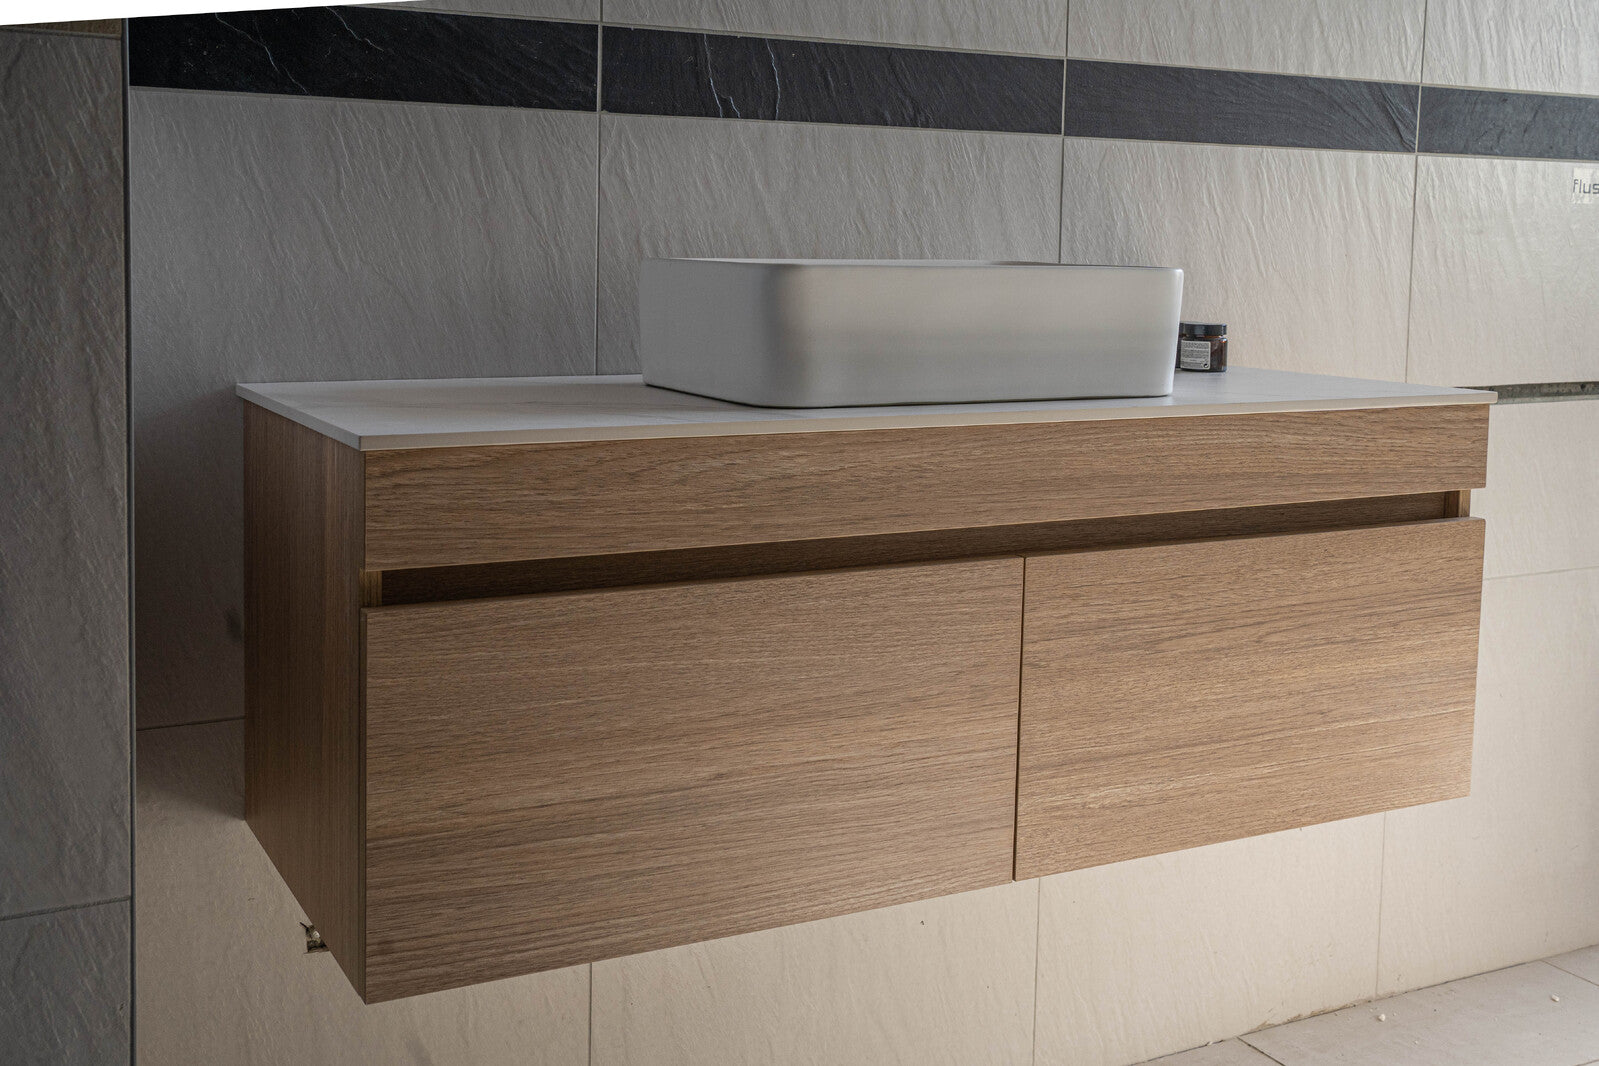 Pick up @Mel Modern look wall hung floating vanity sizes optional Sintered Stone bench top with undermount basin